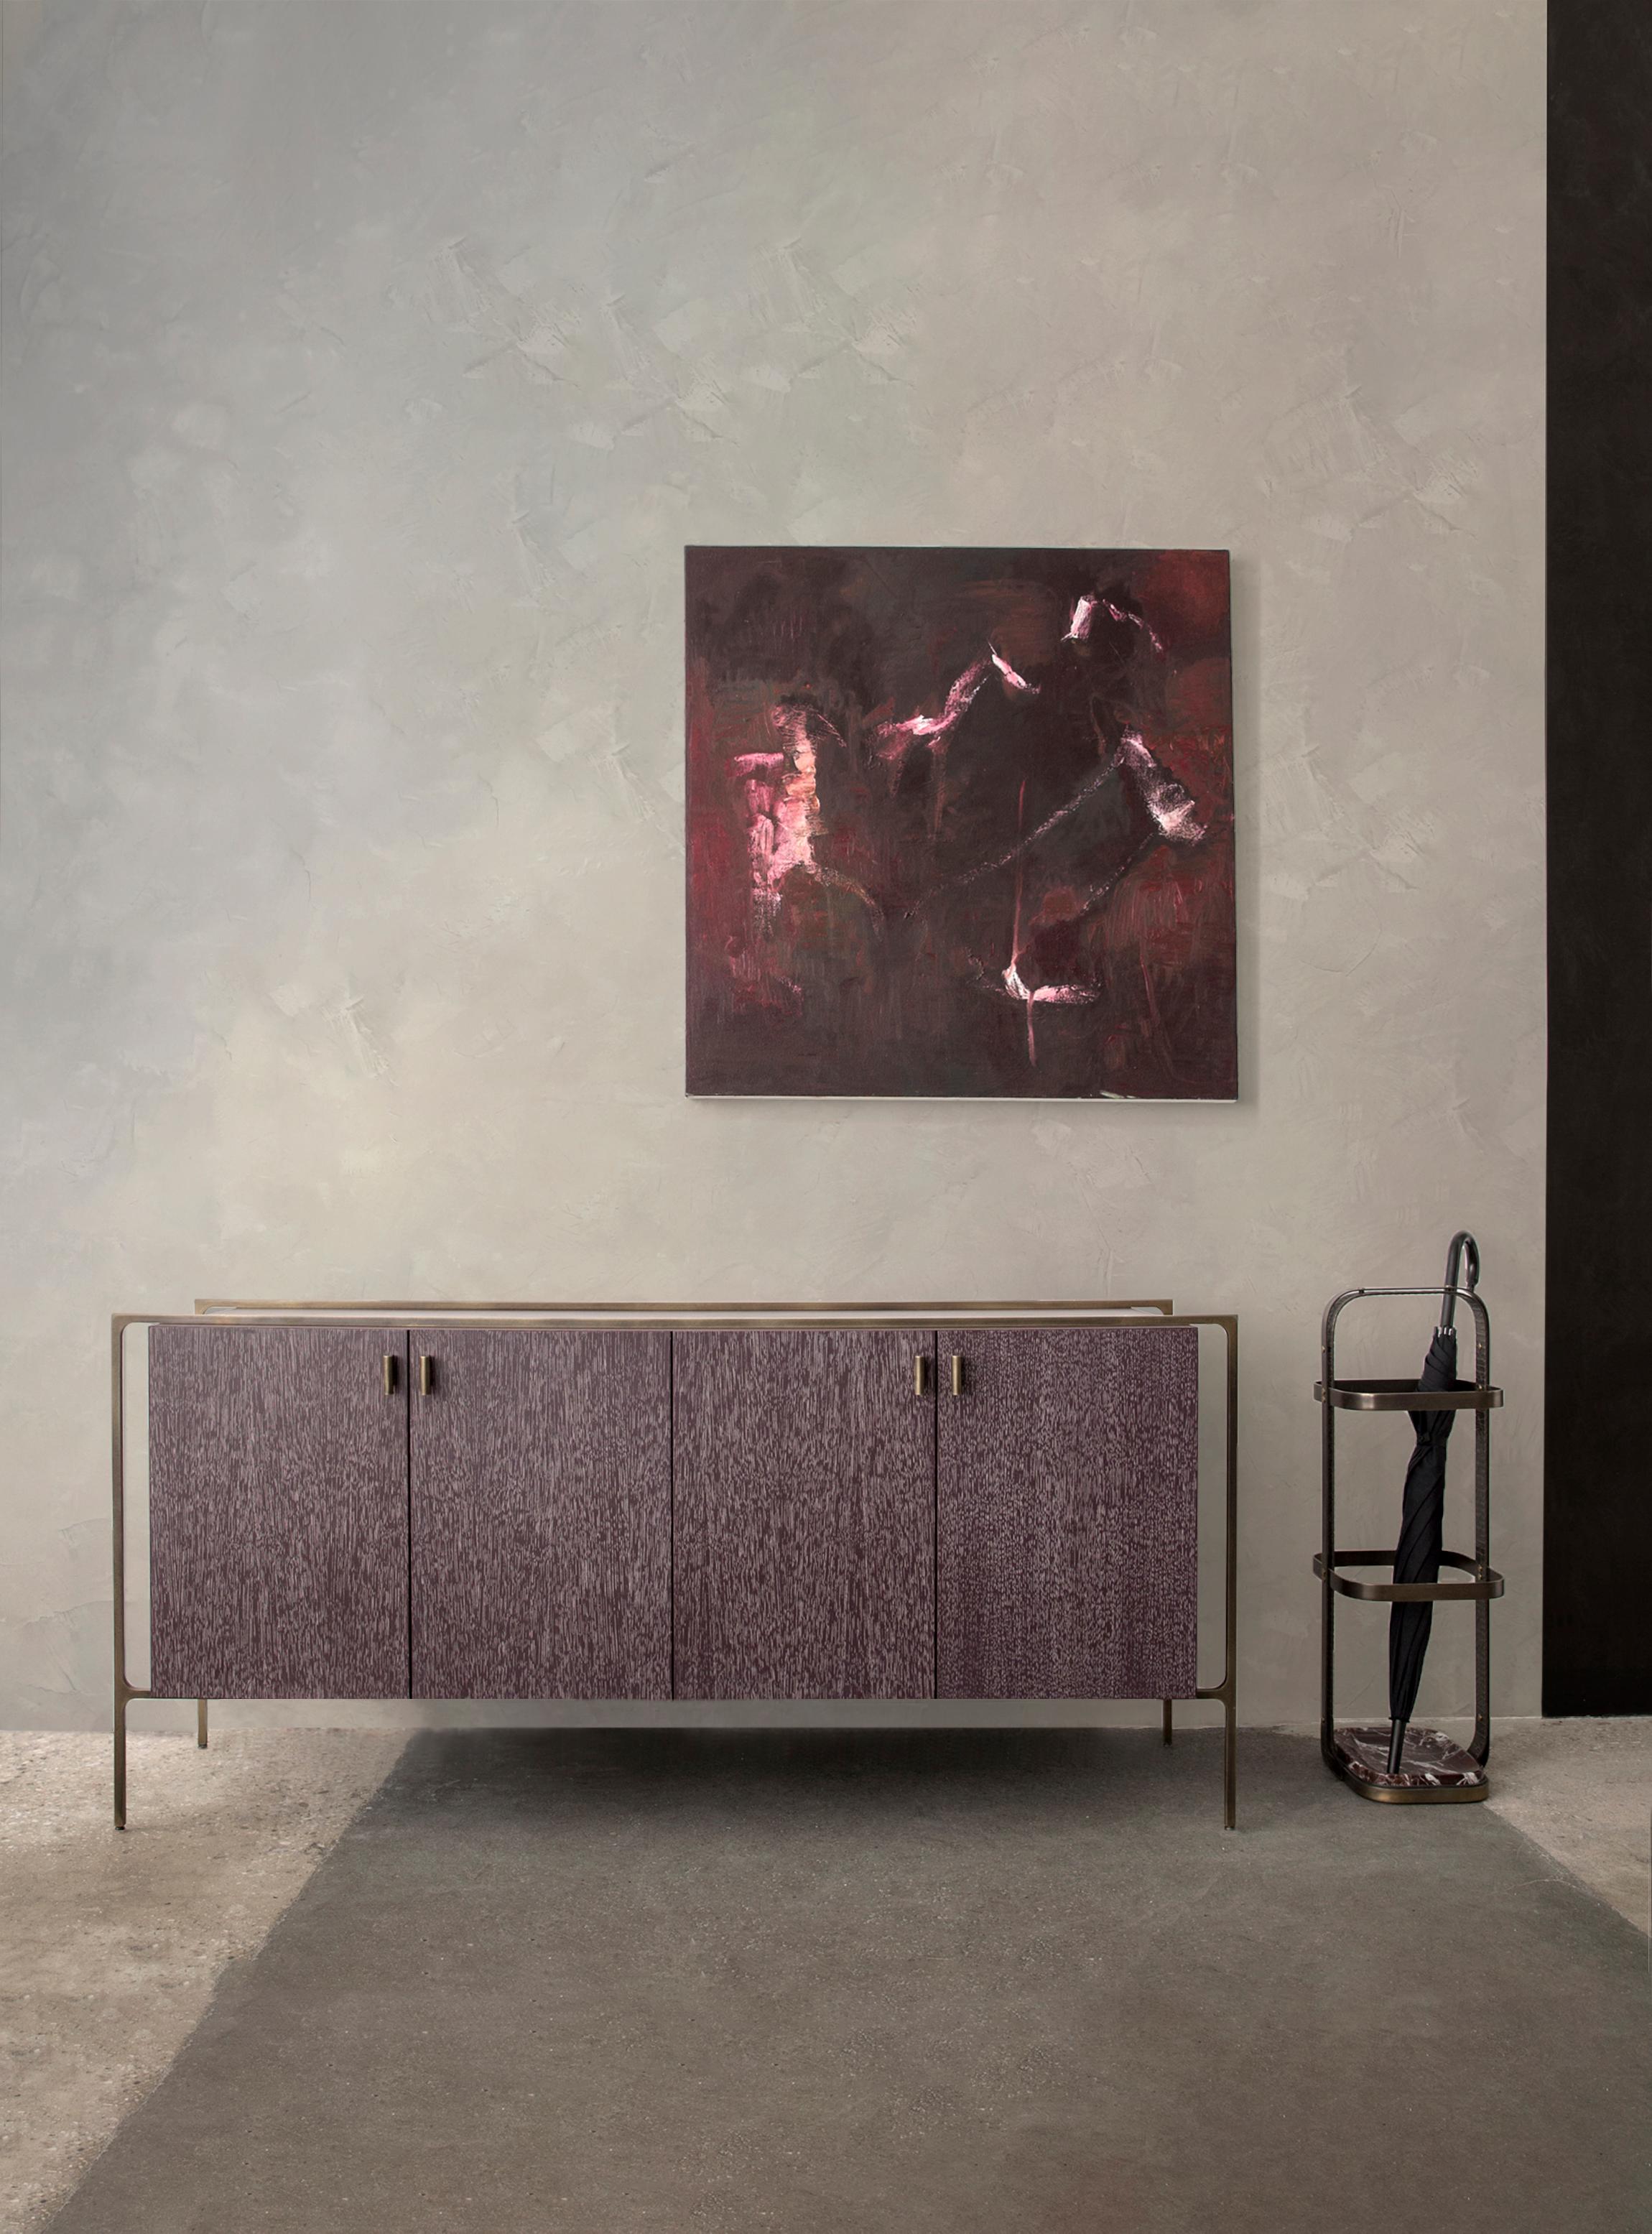 Showroom floor model. List price shown is after 25% applied showroom discount for this piece.

With the signature Lumifer brass 'T' component, the credenza juxtaposes a delicate brass frame with a wooden monolith.

Each of the two parts